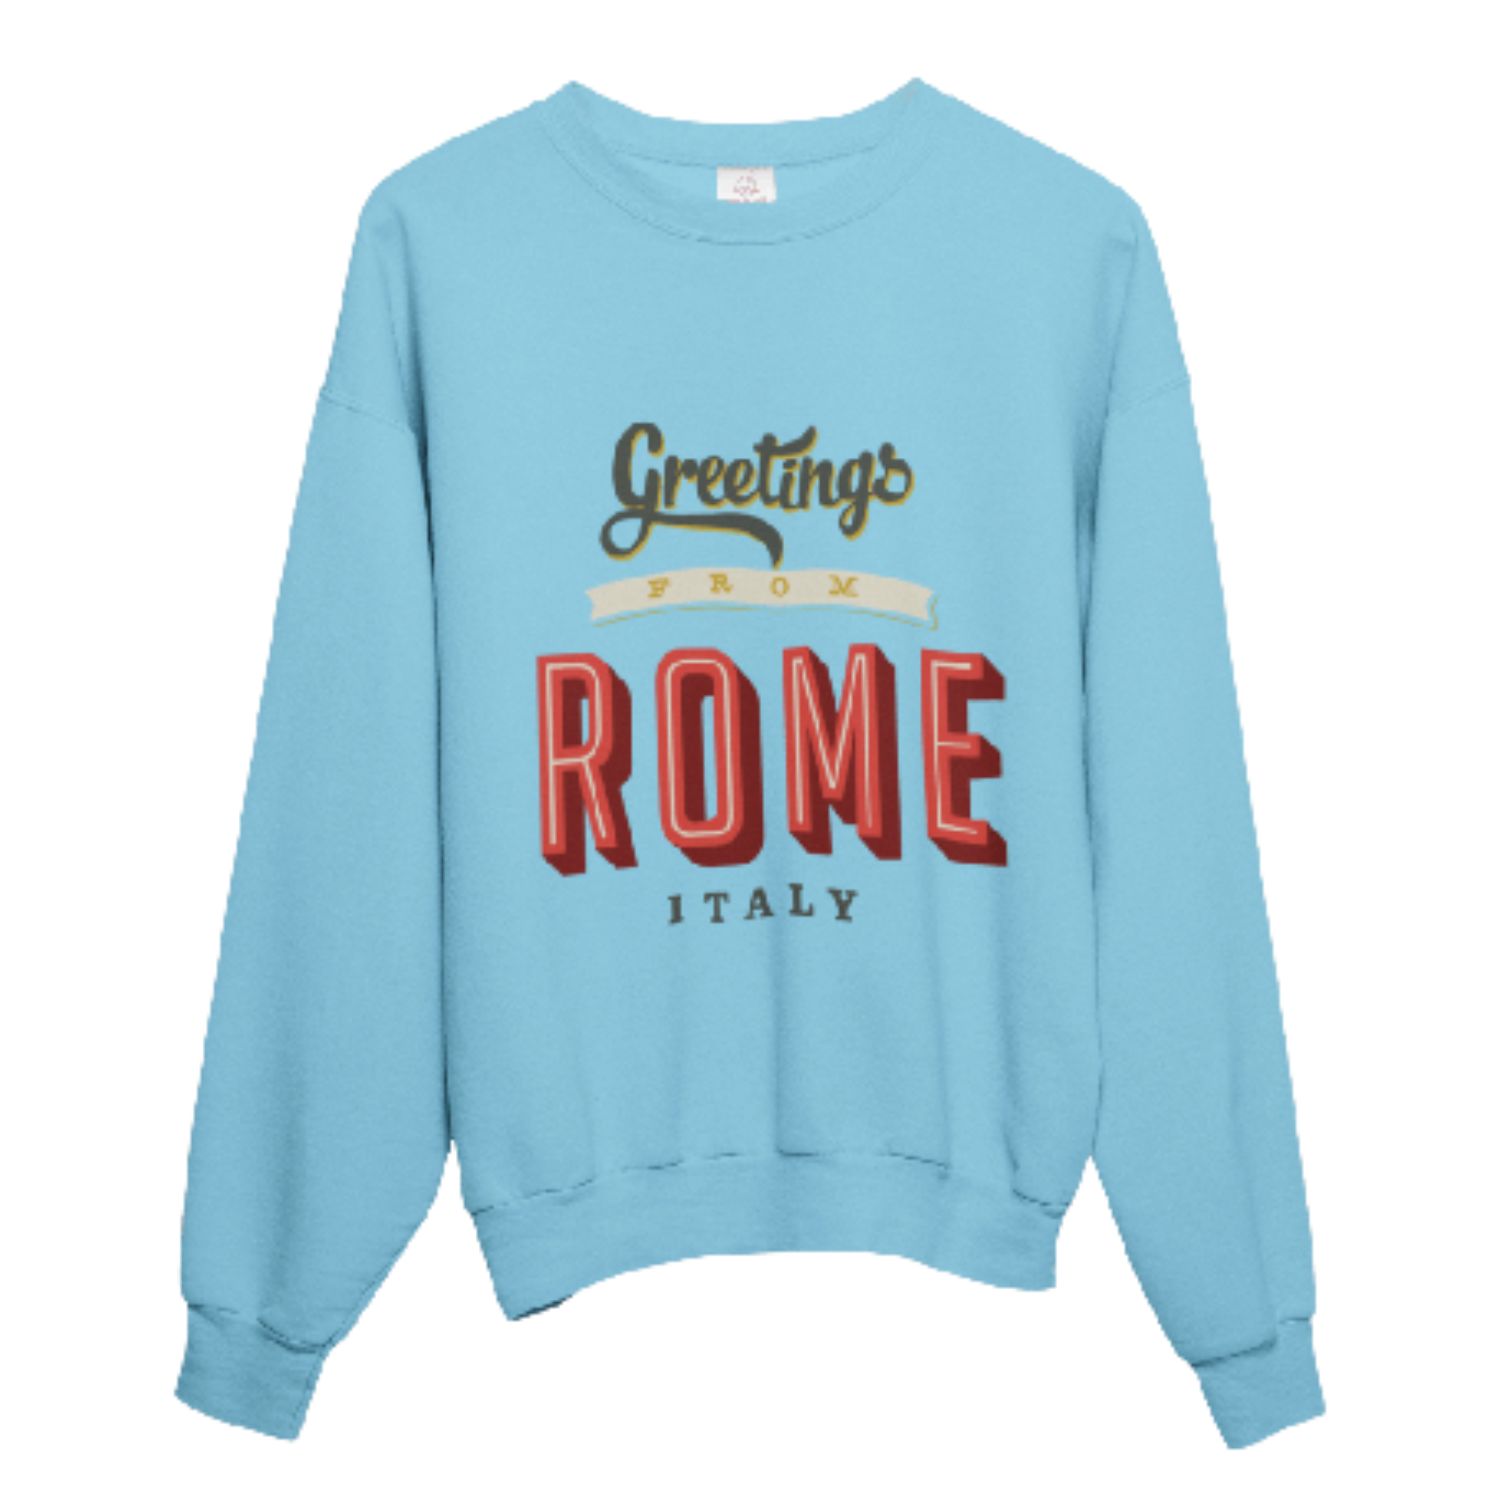 Women’s "Greetings From Rome" Oversized Unisex Sweatshirt - Blue L/Xl Tricult